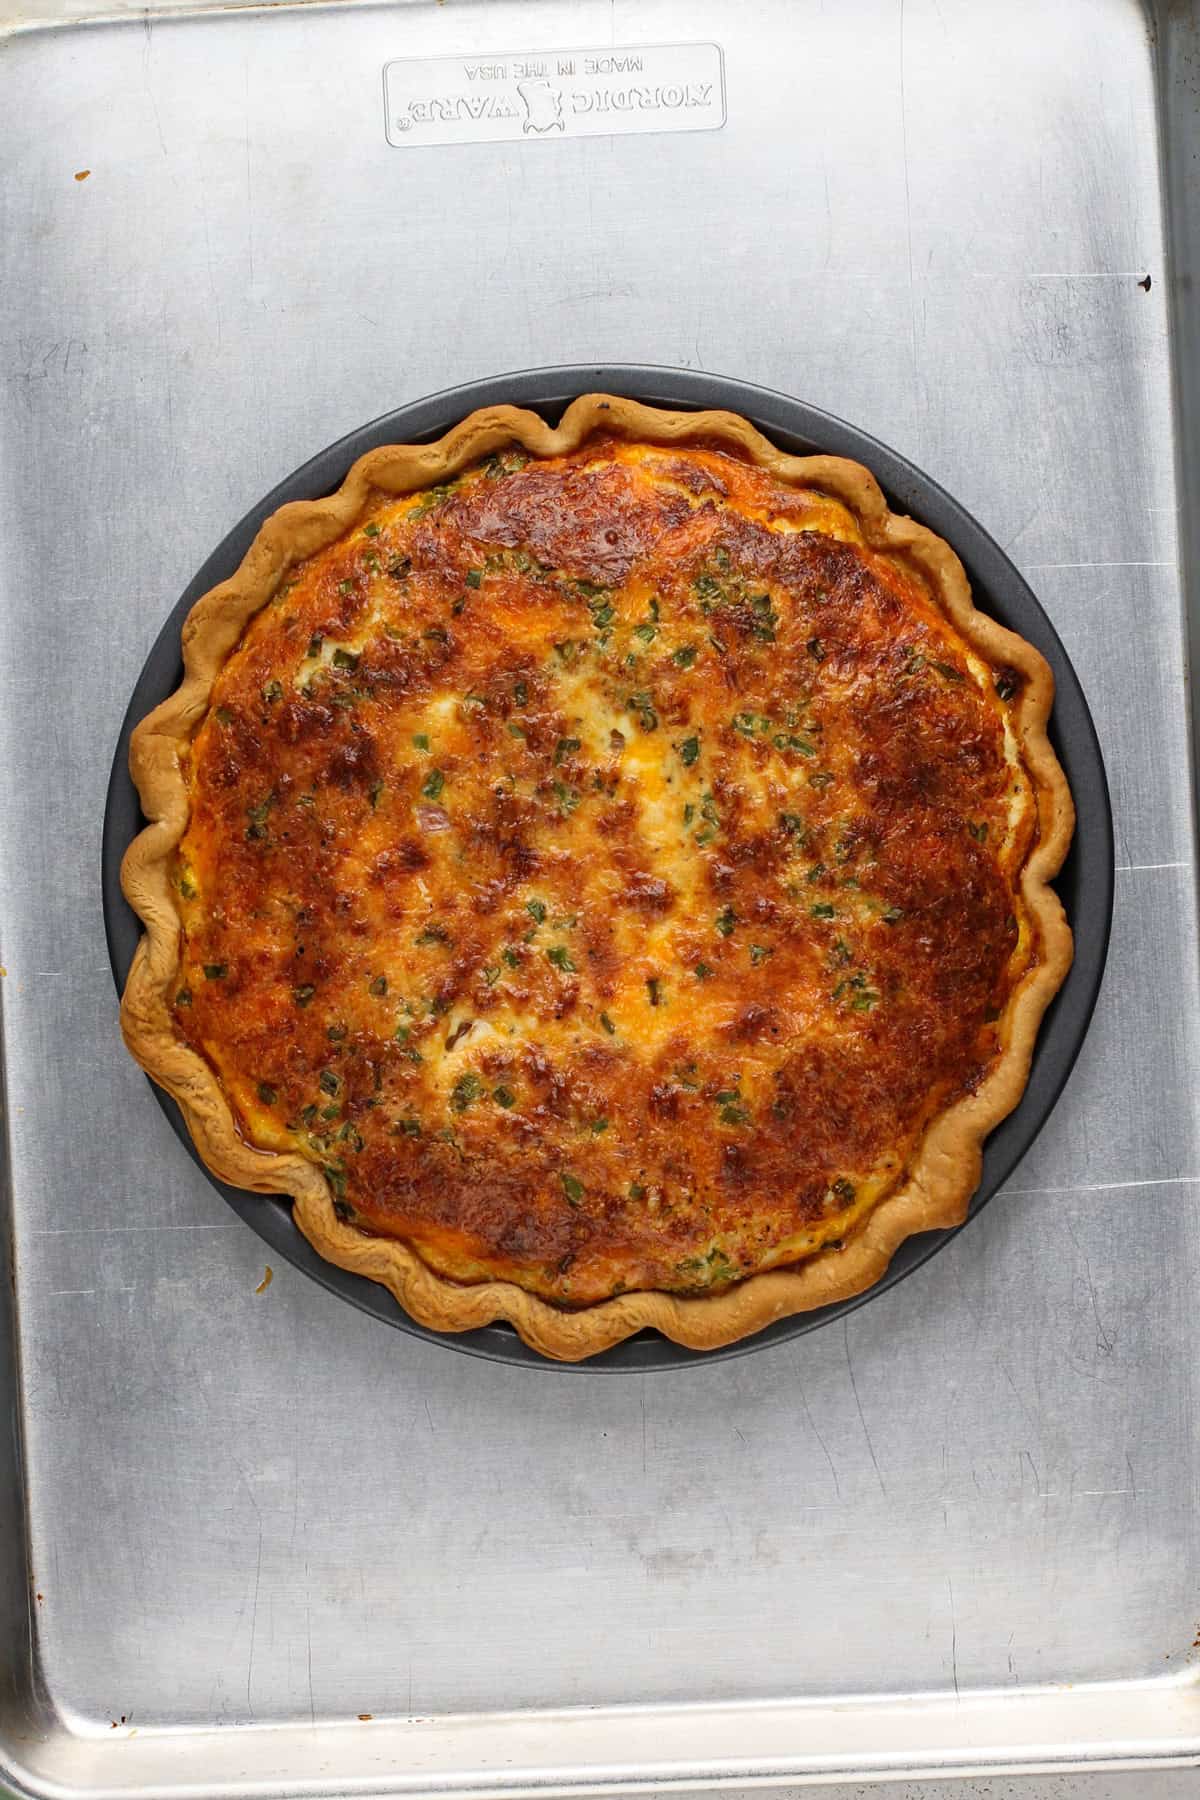 Baked quiche cooling on a rimmed baking sheet.